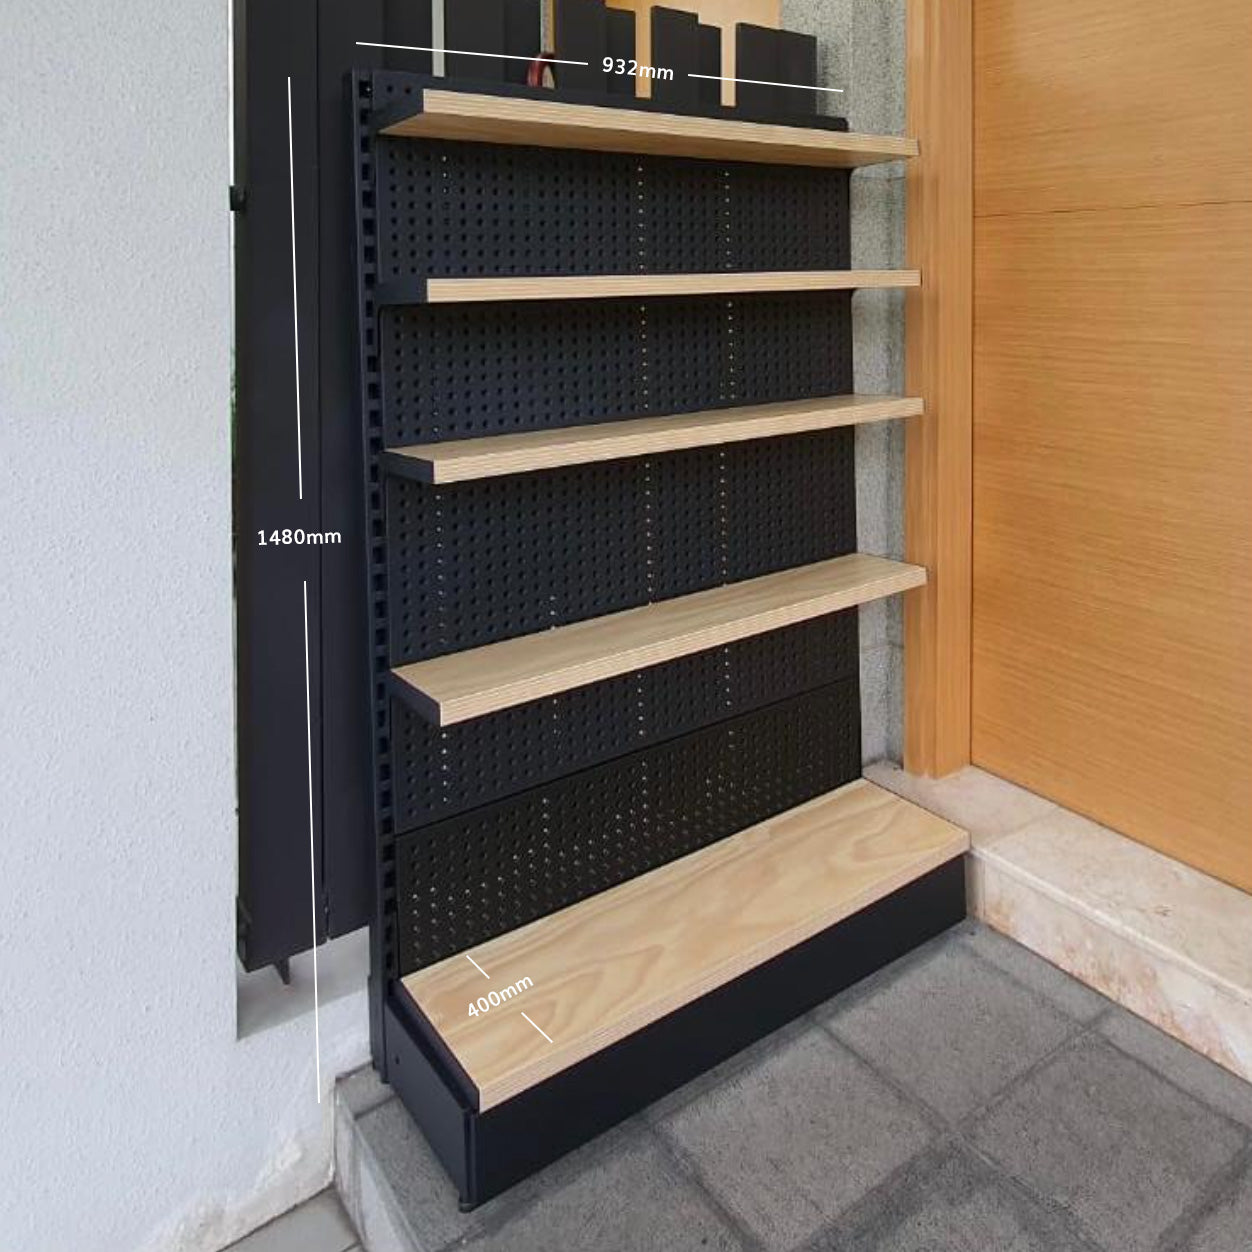 Storage - The Shoe Cubby